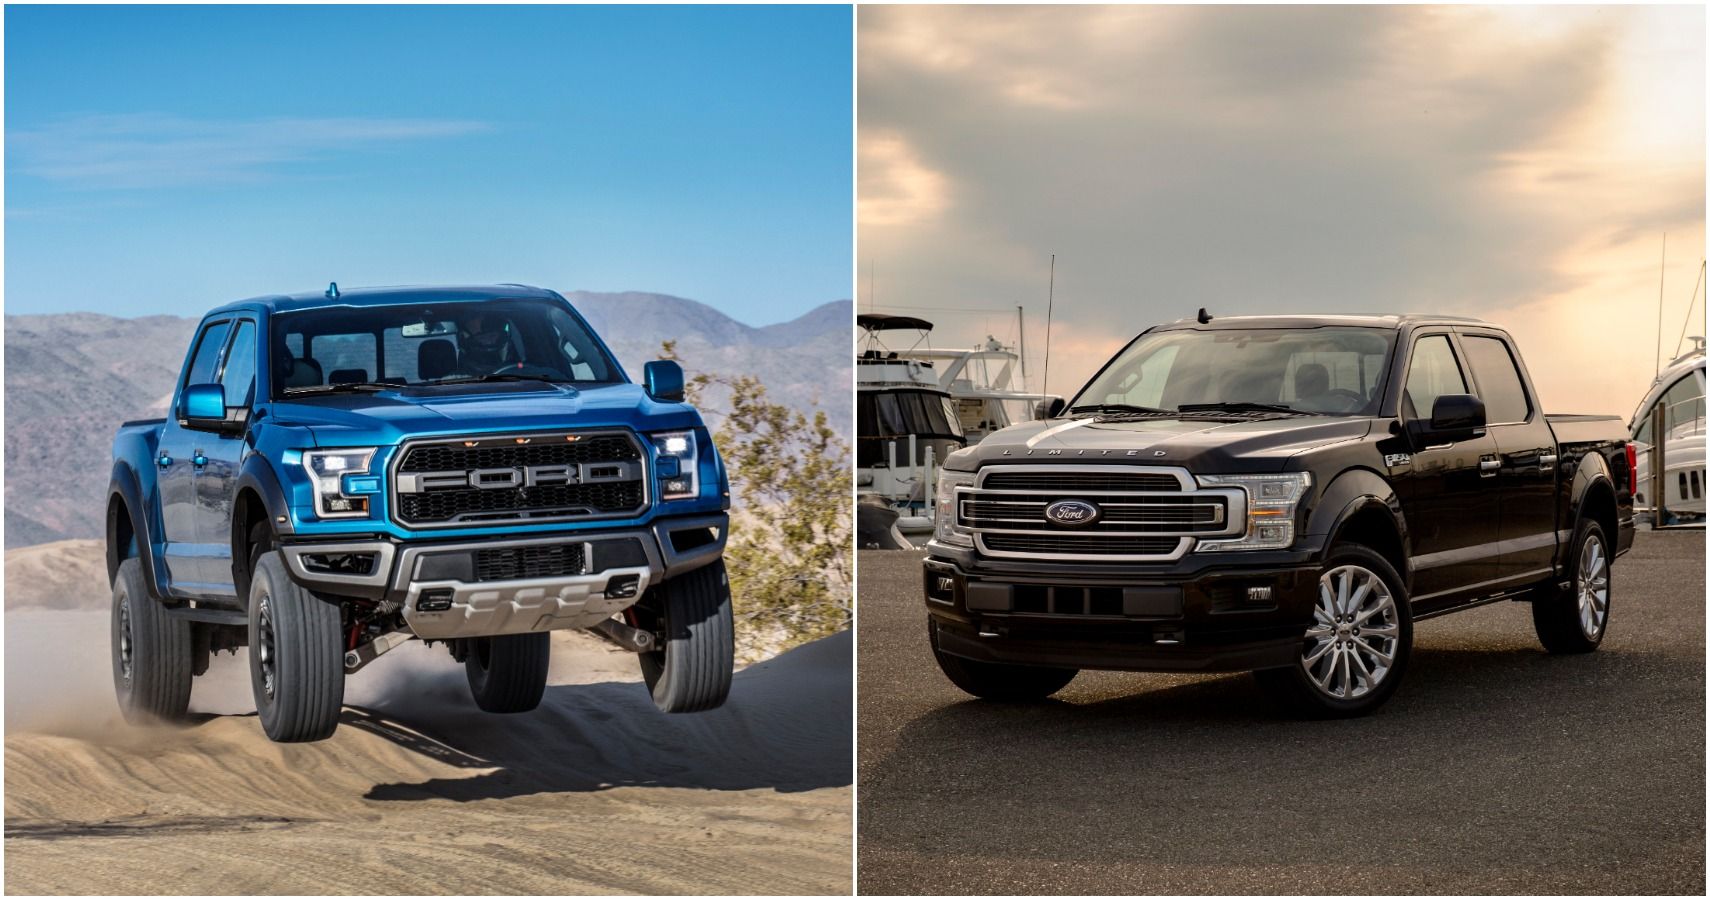 Find Out Which 450 HP Ford Pickup Is Better: Raptor Or Limited F-150